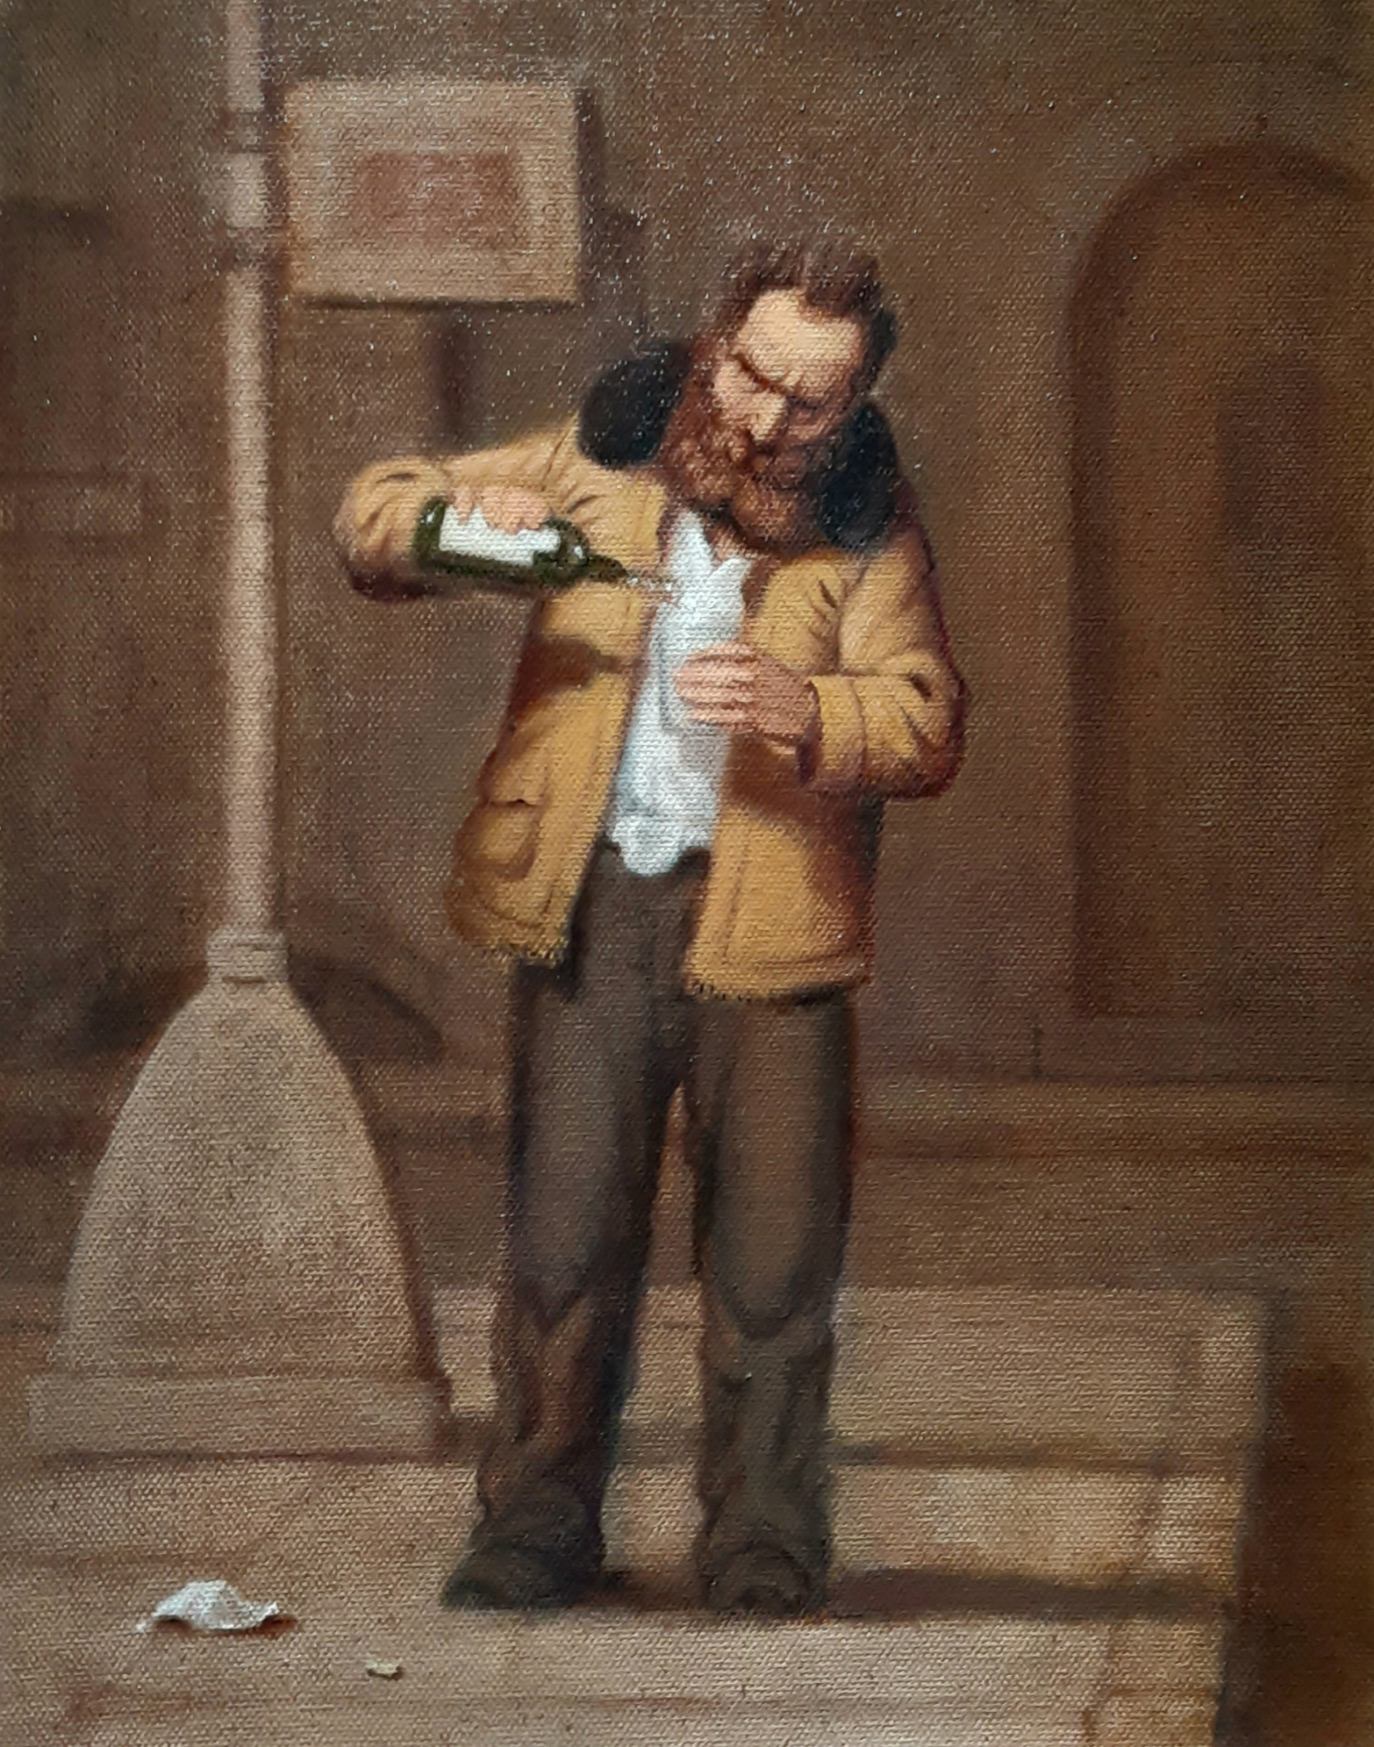 Artist Richard Lithgow's painting of a homeless alcoholic.